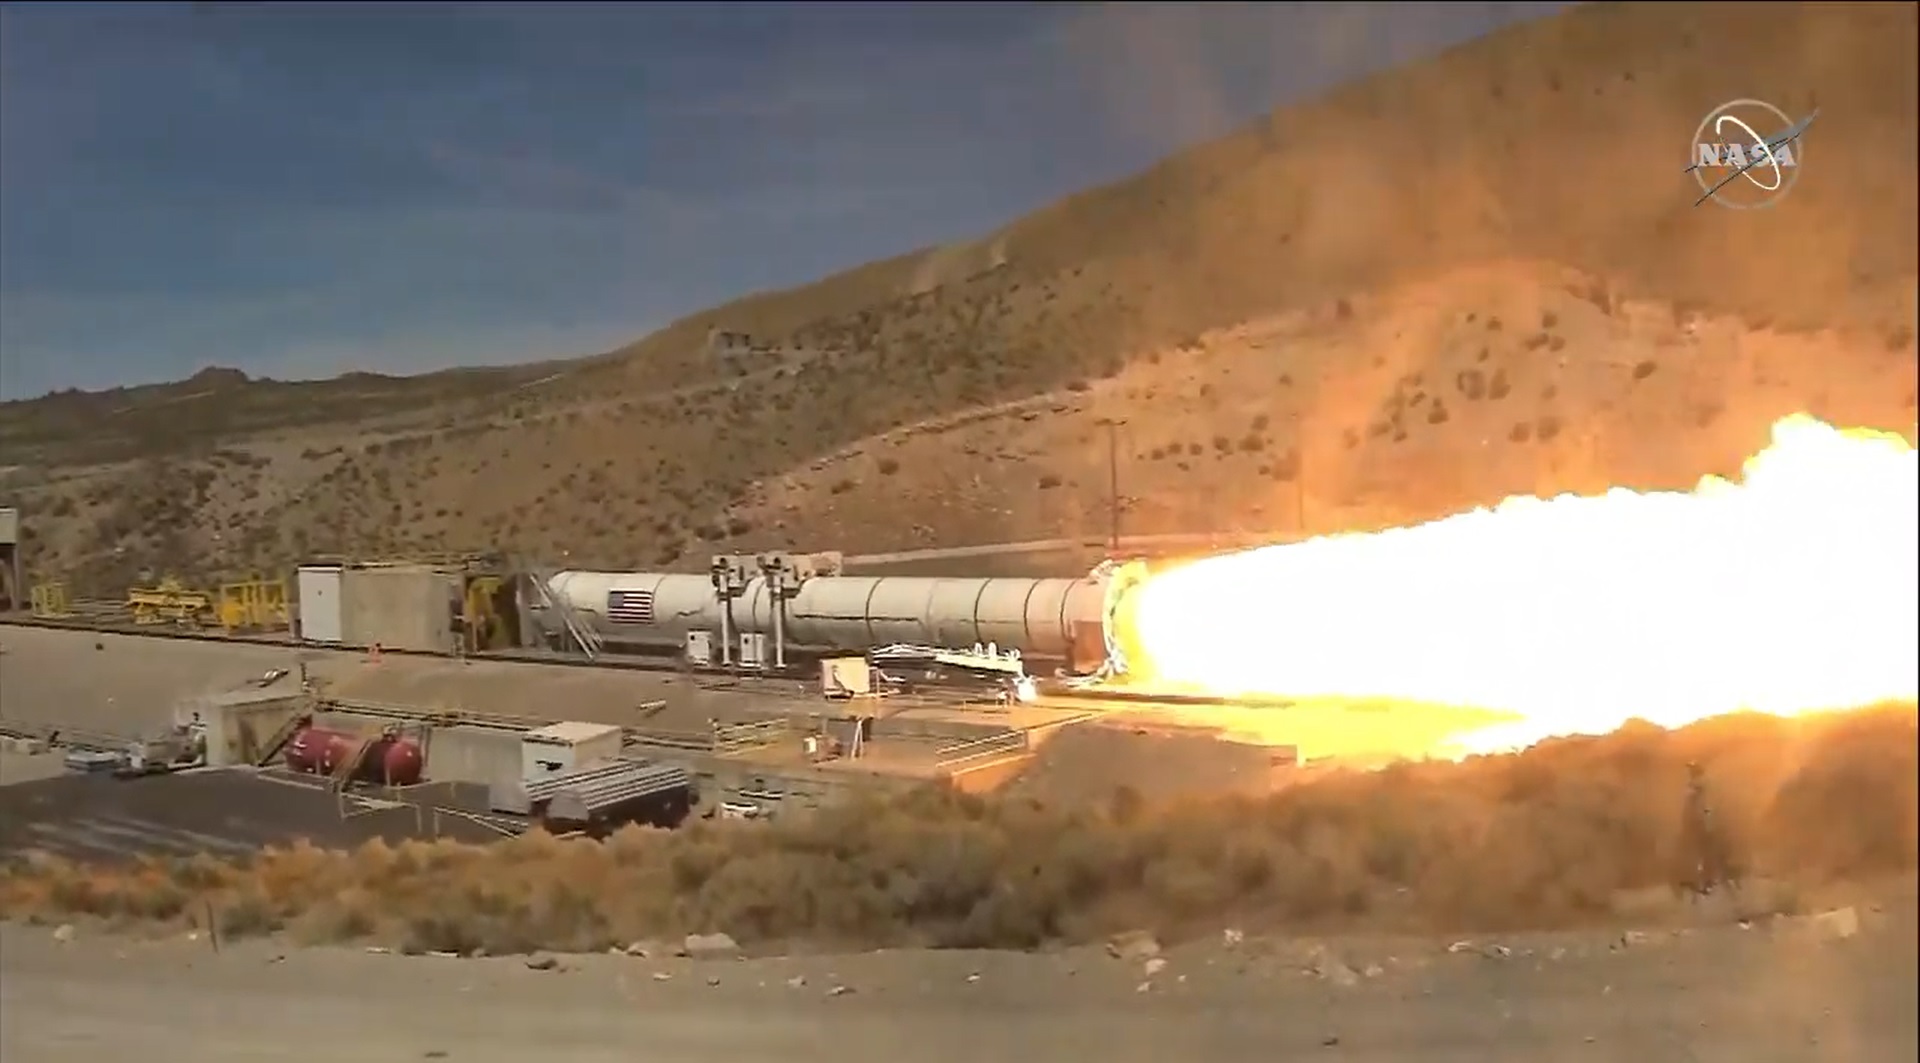 NASA’s Artemis Moon mission hits important milestone with successful full-scale booster test